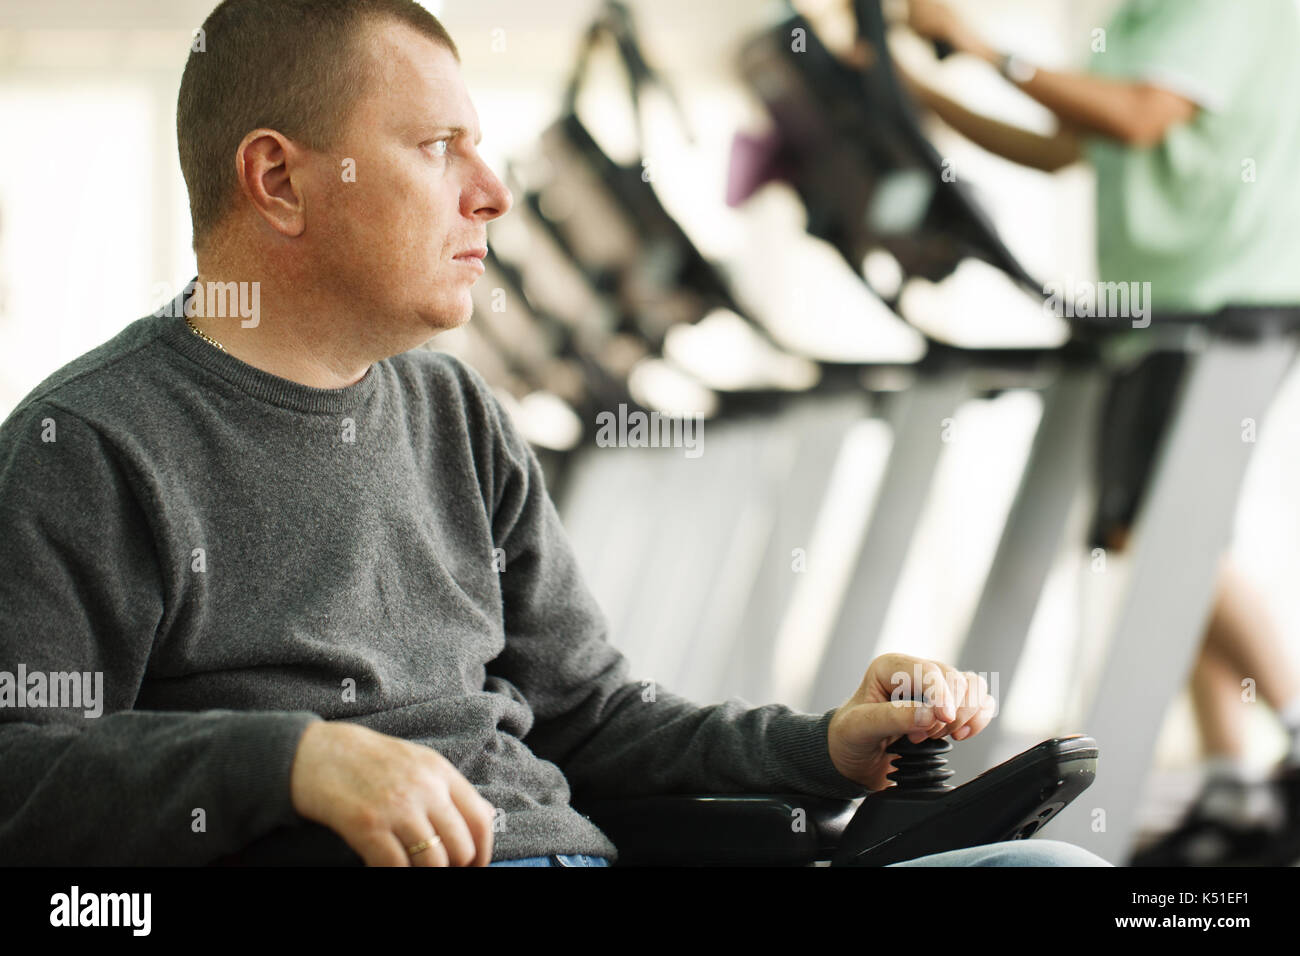 Disabled man in the fitness club Stock Photo